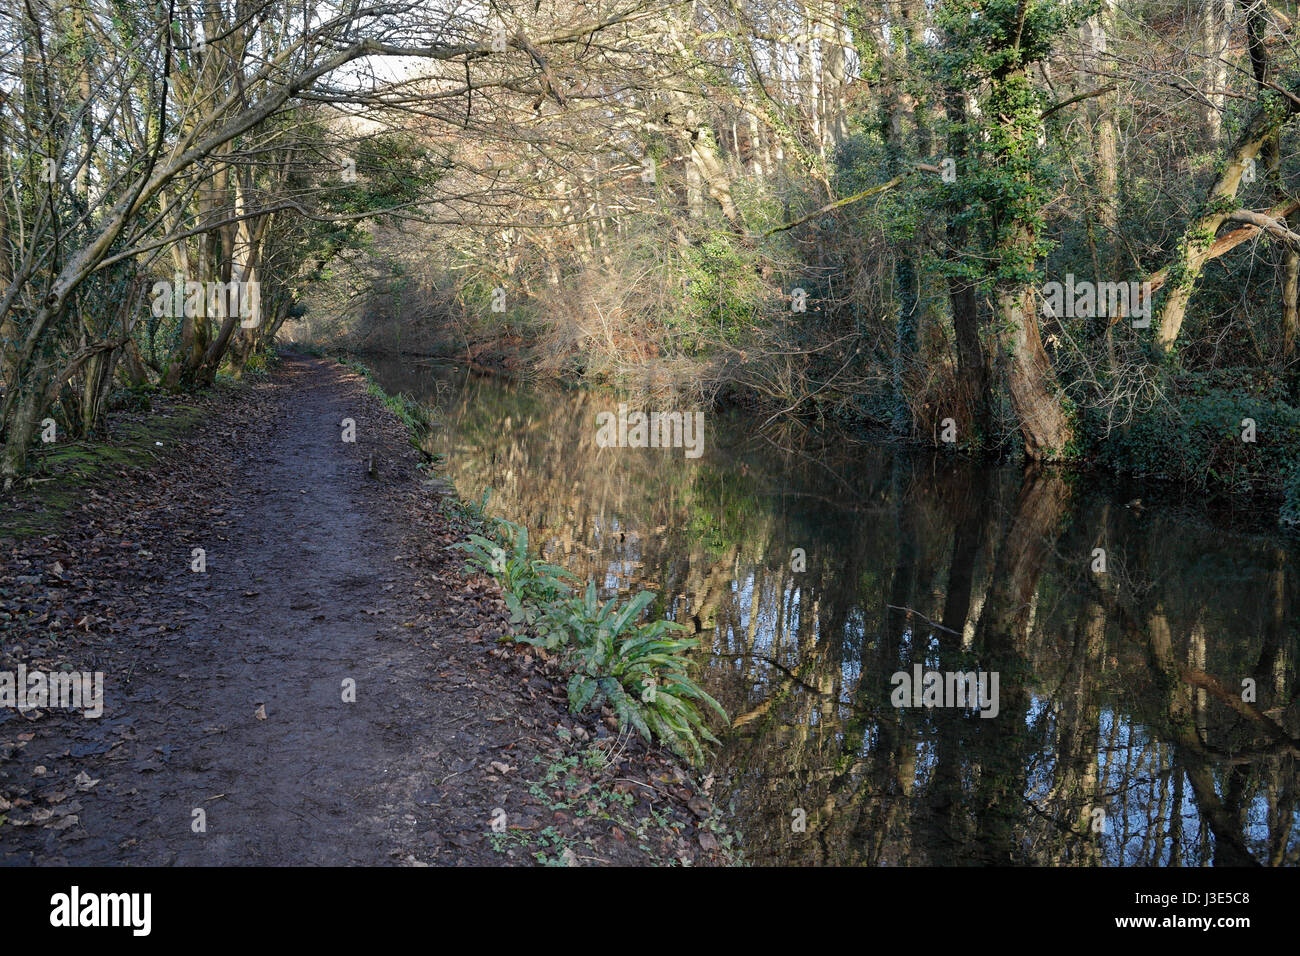 Glamorganshire canal at Forest farm Cardiff Wales, UK Nature reserve Stock Photo